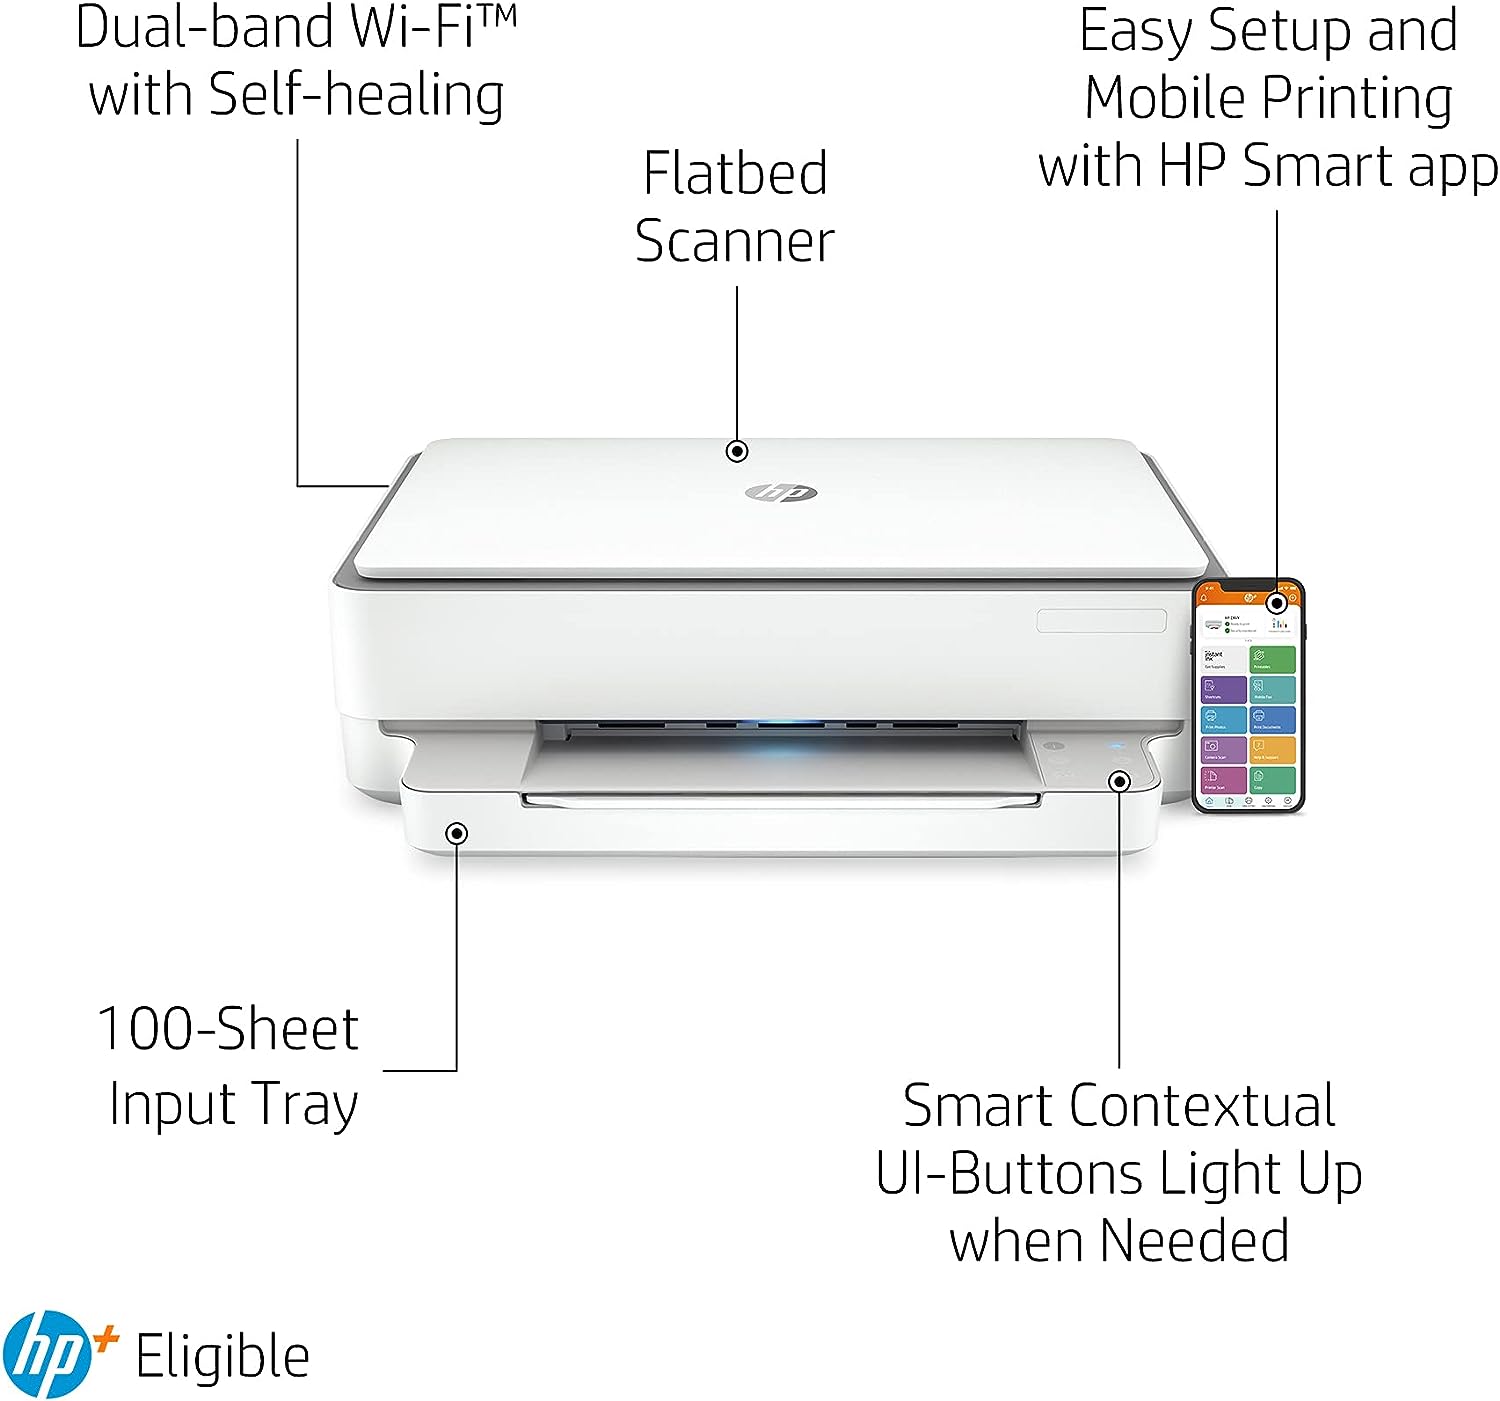 Hp Envy 6020e All In One Colour Printer Review Stay At Home Business 3315